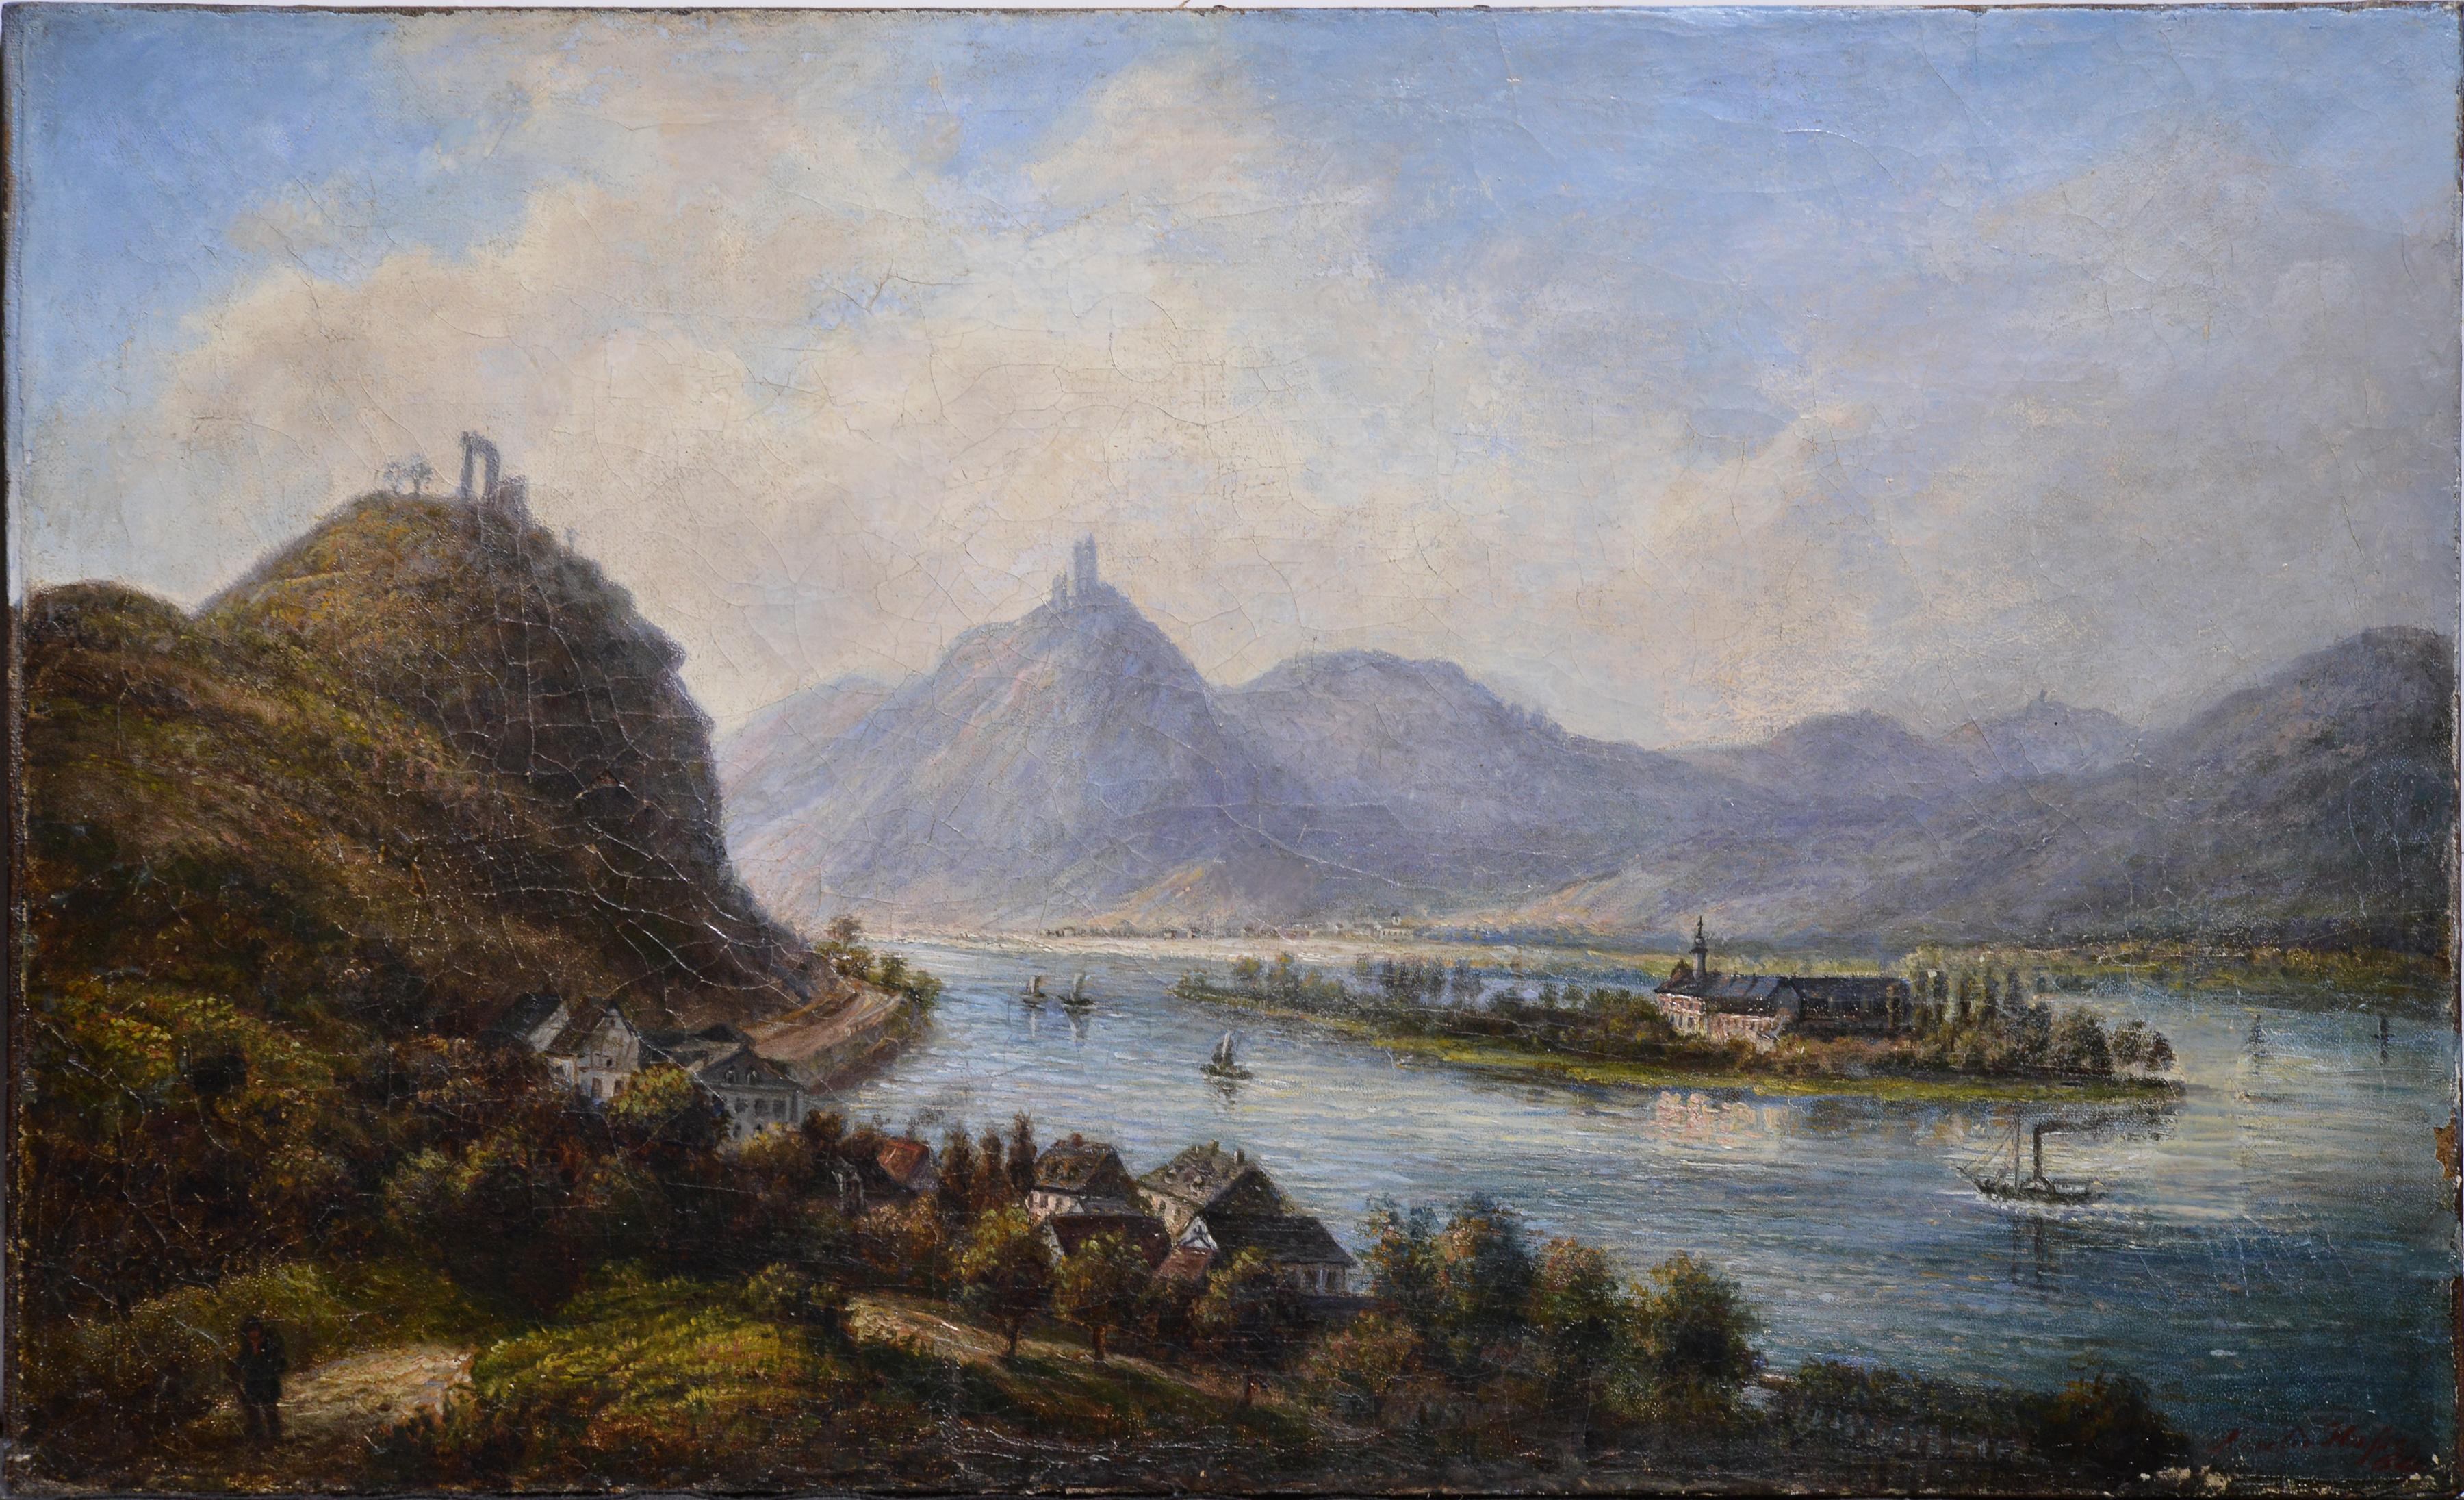 Alpine Valley Landscape with High Hills and River 19th Century Oil Painting - Brown Landscape Painting by Unknown